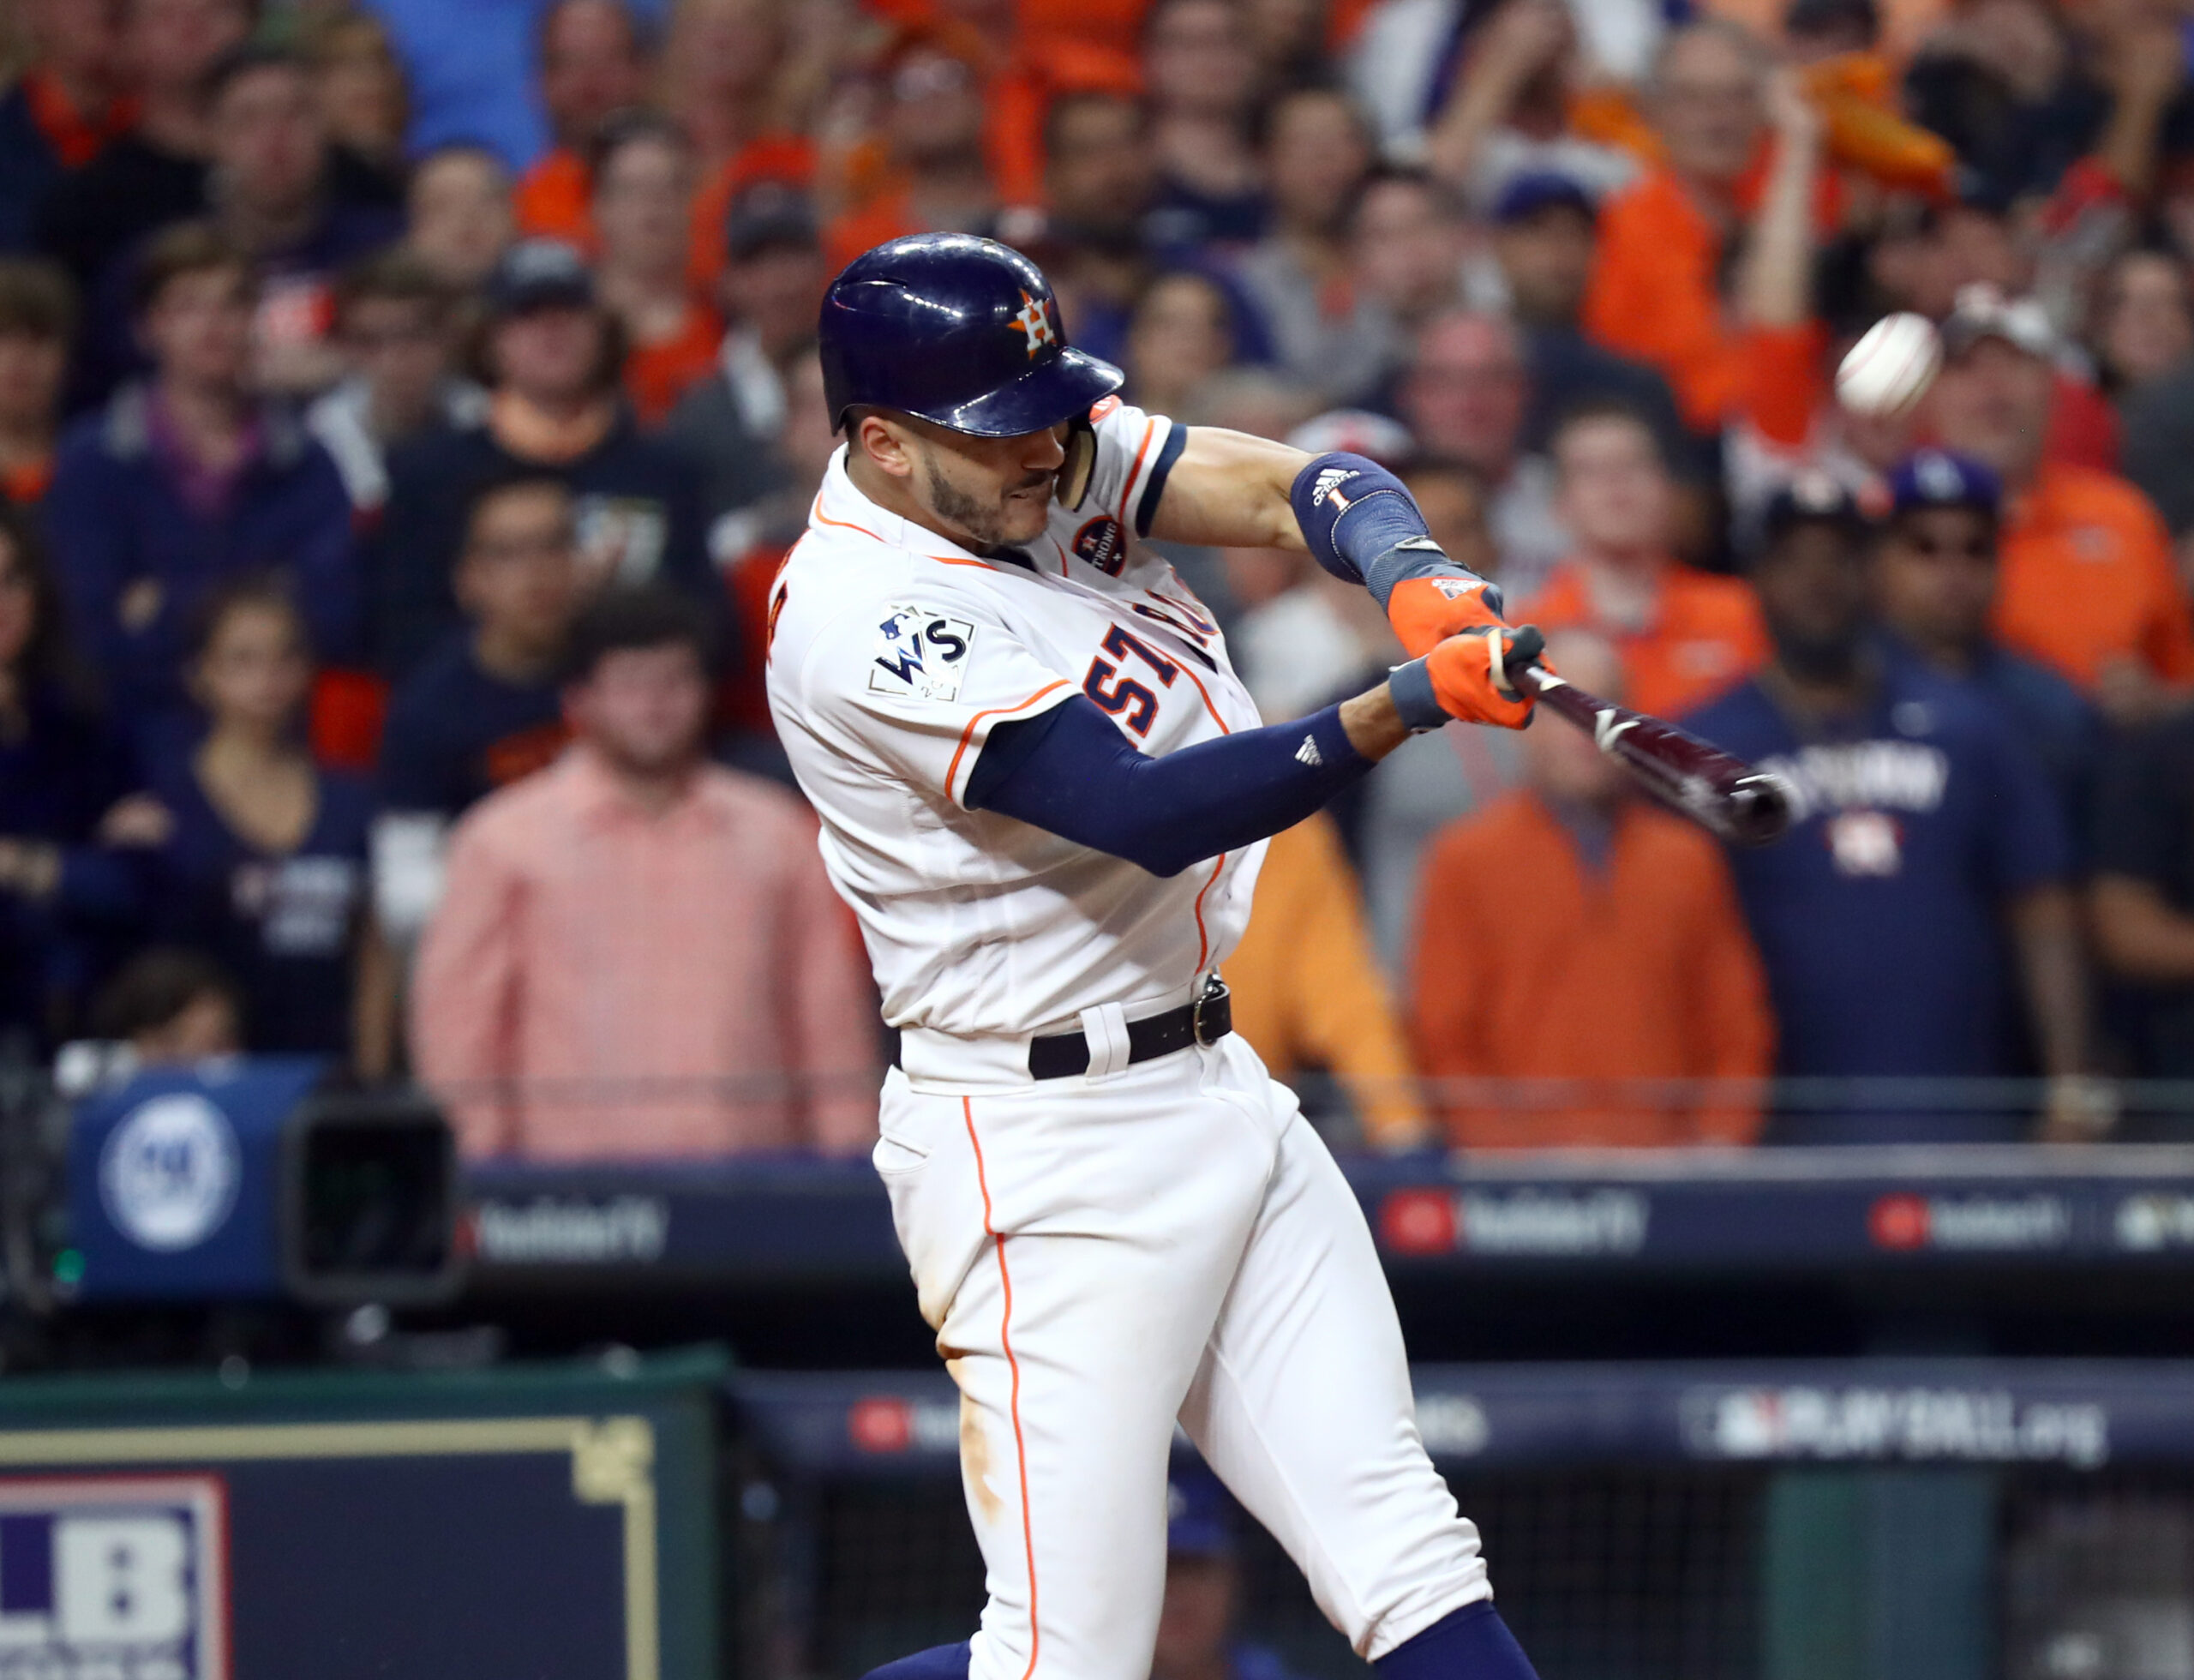 Scott Boras: Giants Had Time to Make Carlos Correa Deal Official